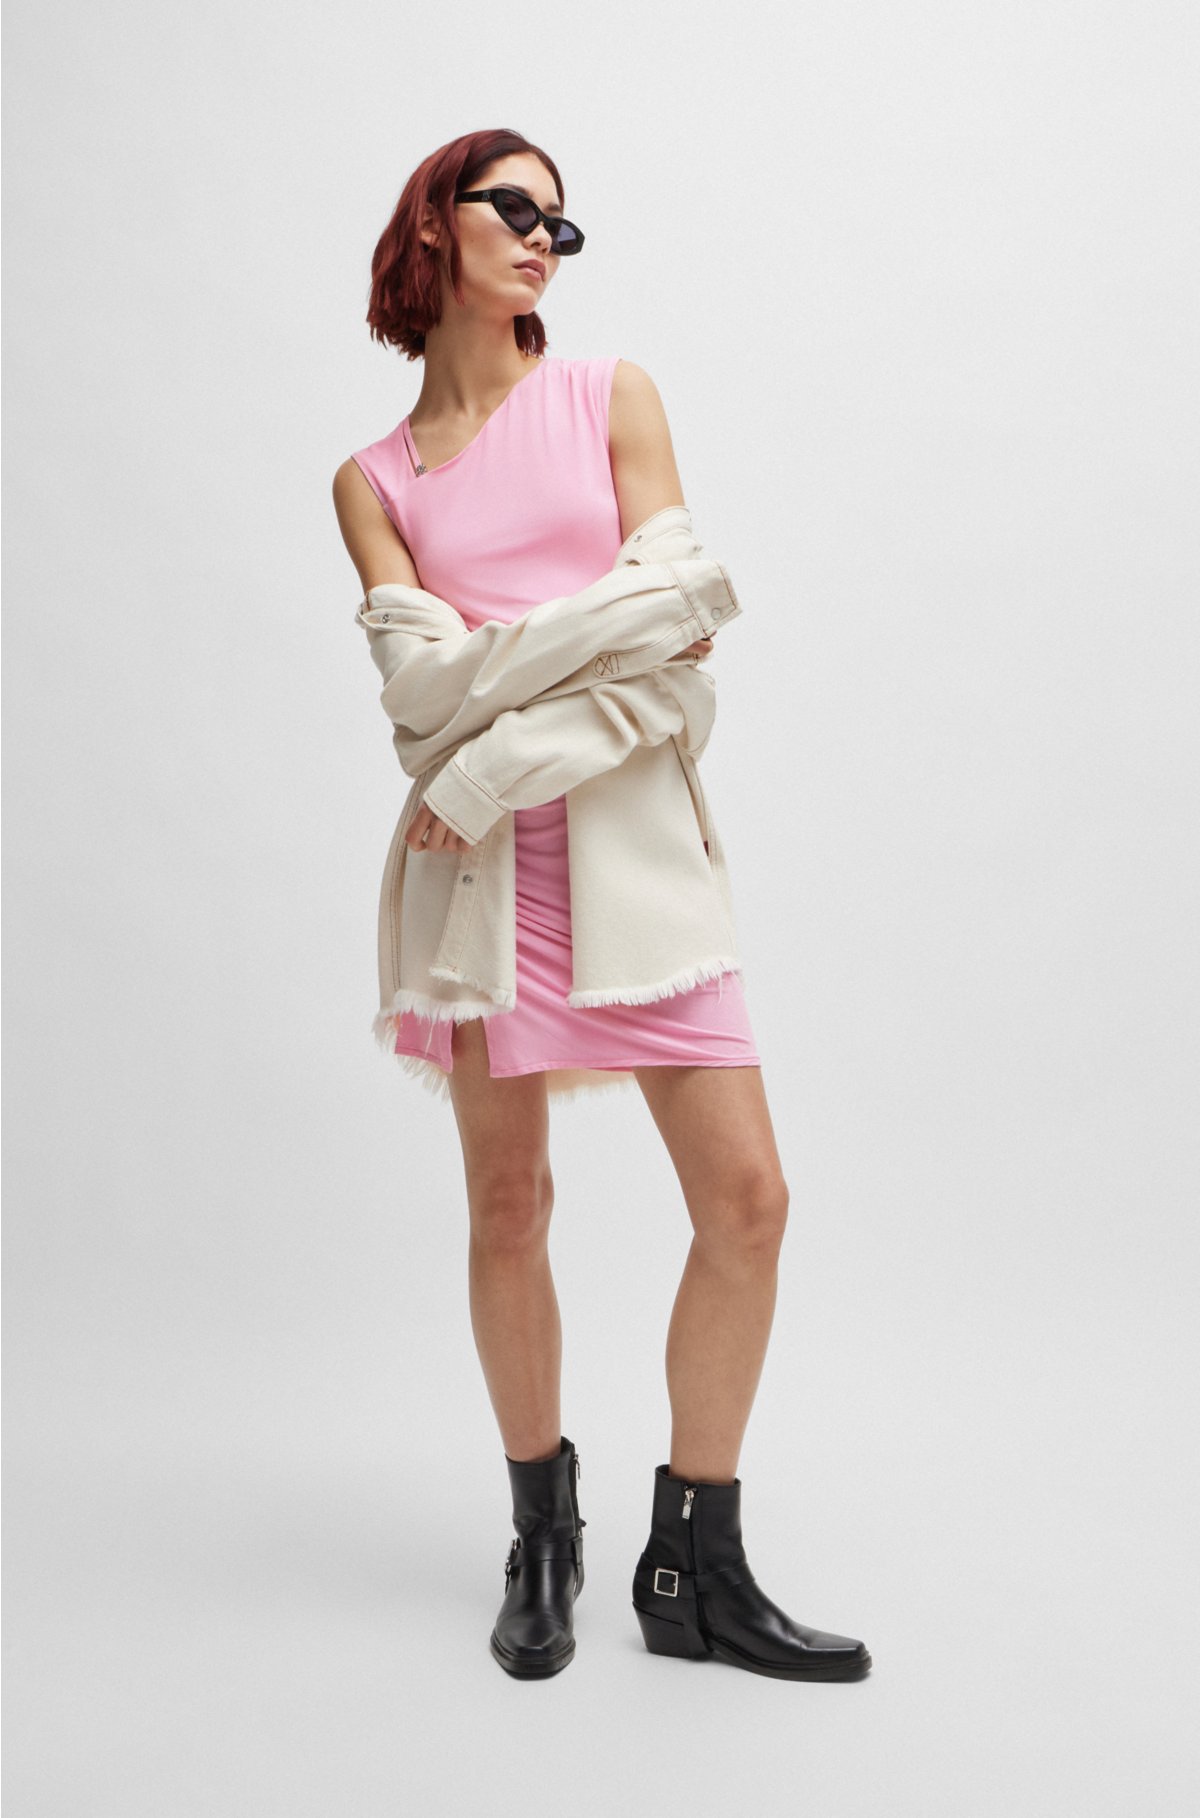 Slim-fit dress with asymmetric details and stacked logo, Pink